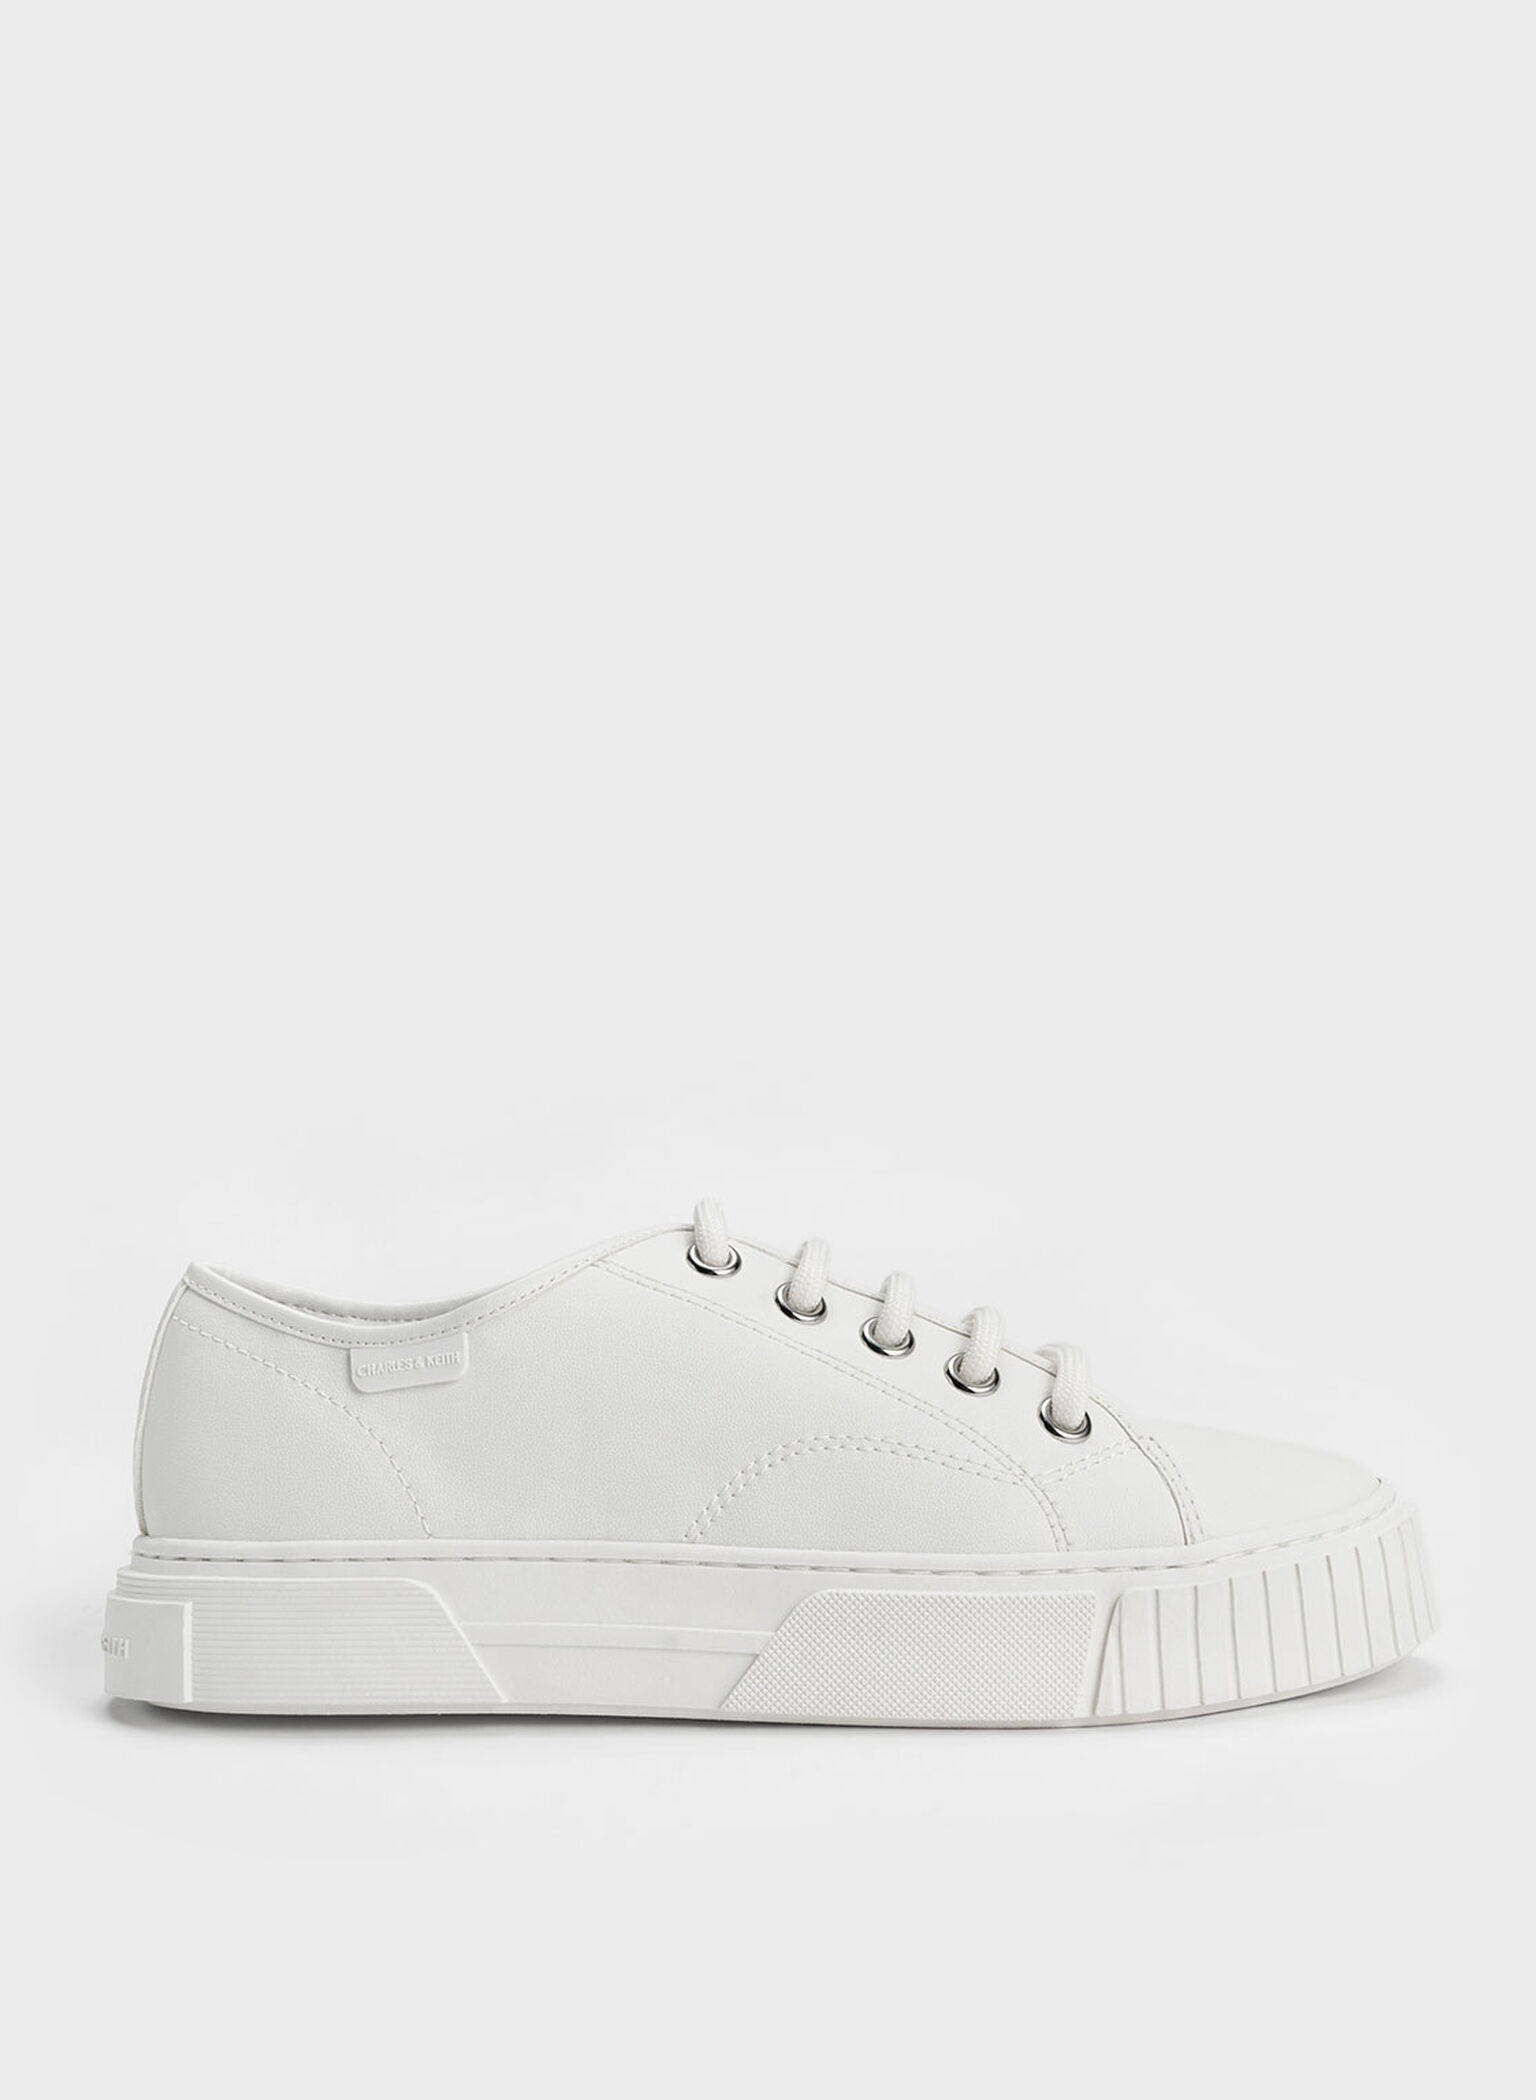 White Panelled Low-Top Sneakers - CHARLES & KEITH SG